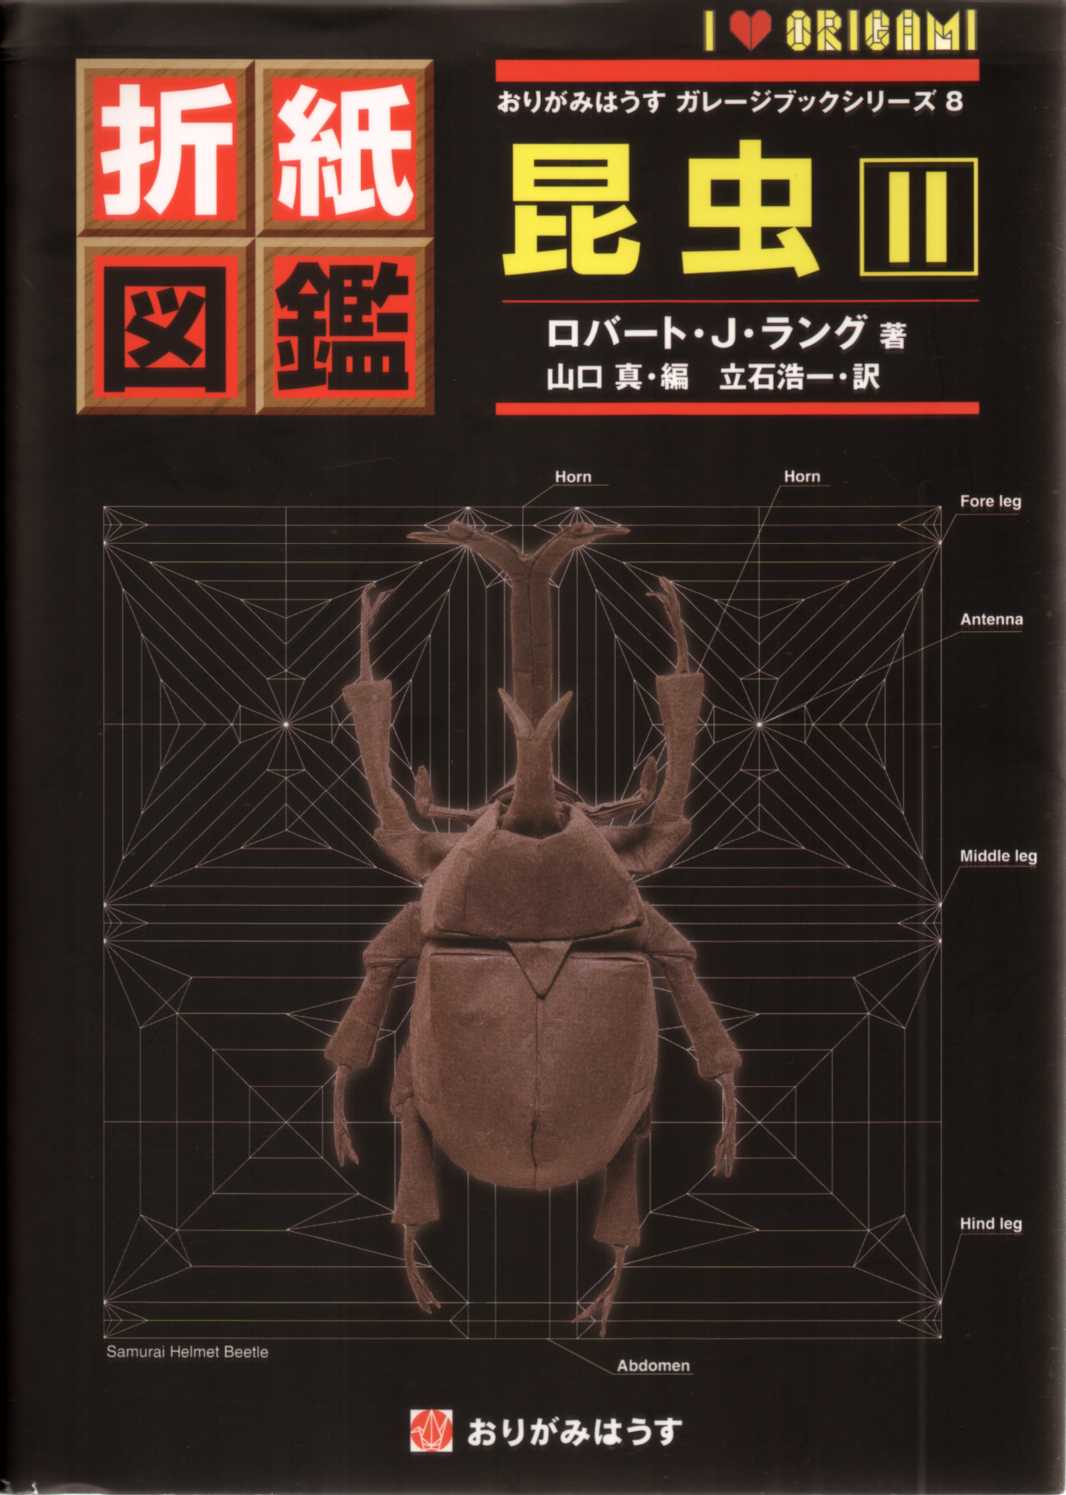 Origami Insects II / 折紙図鑑　昆虫・2 : page 96.